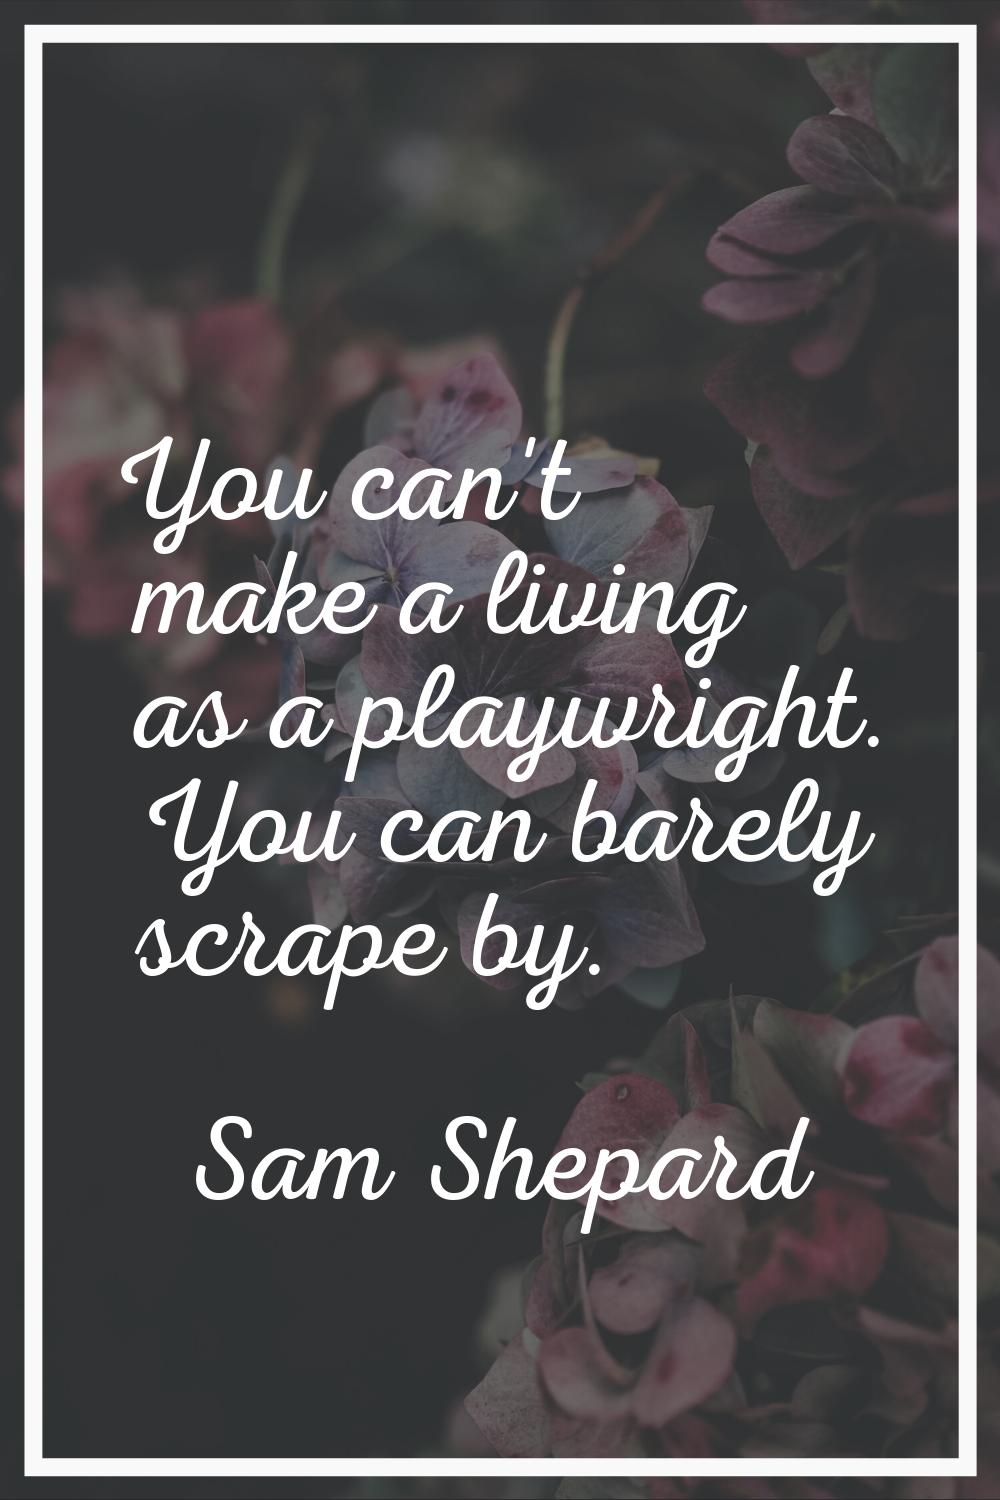 You can't make a living as a playwright. You can barely scrape by.